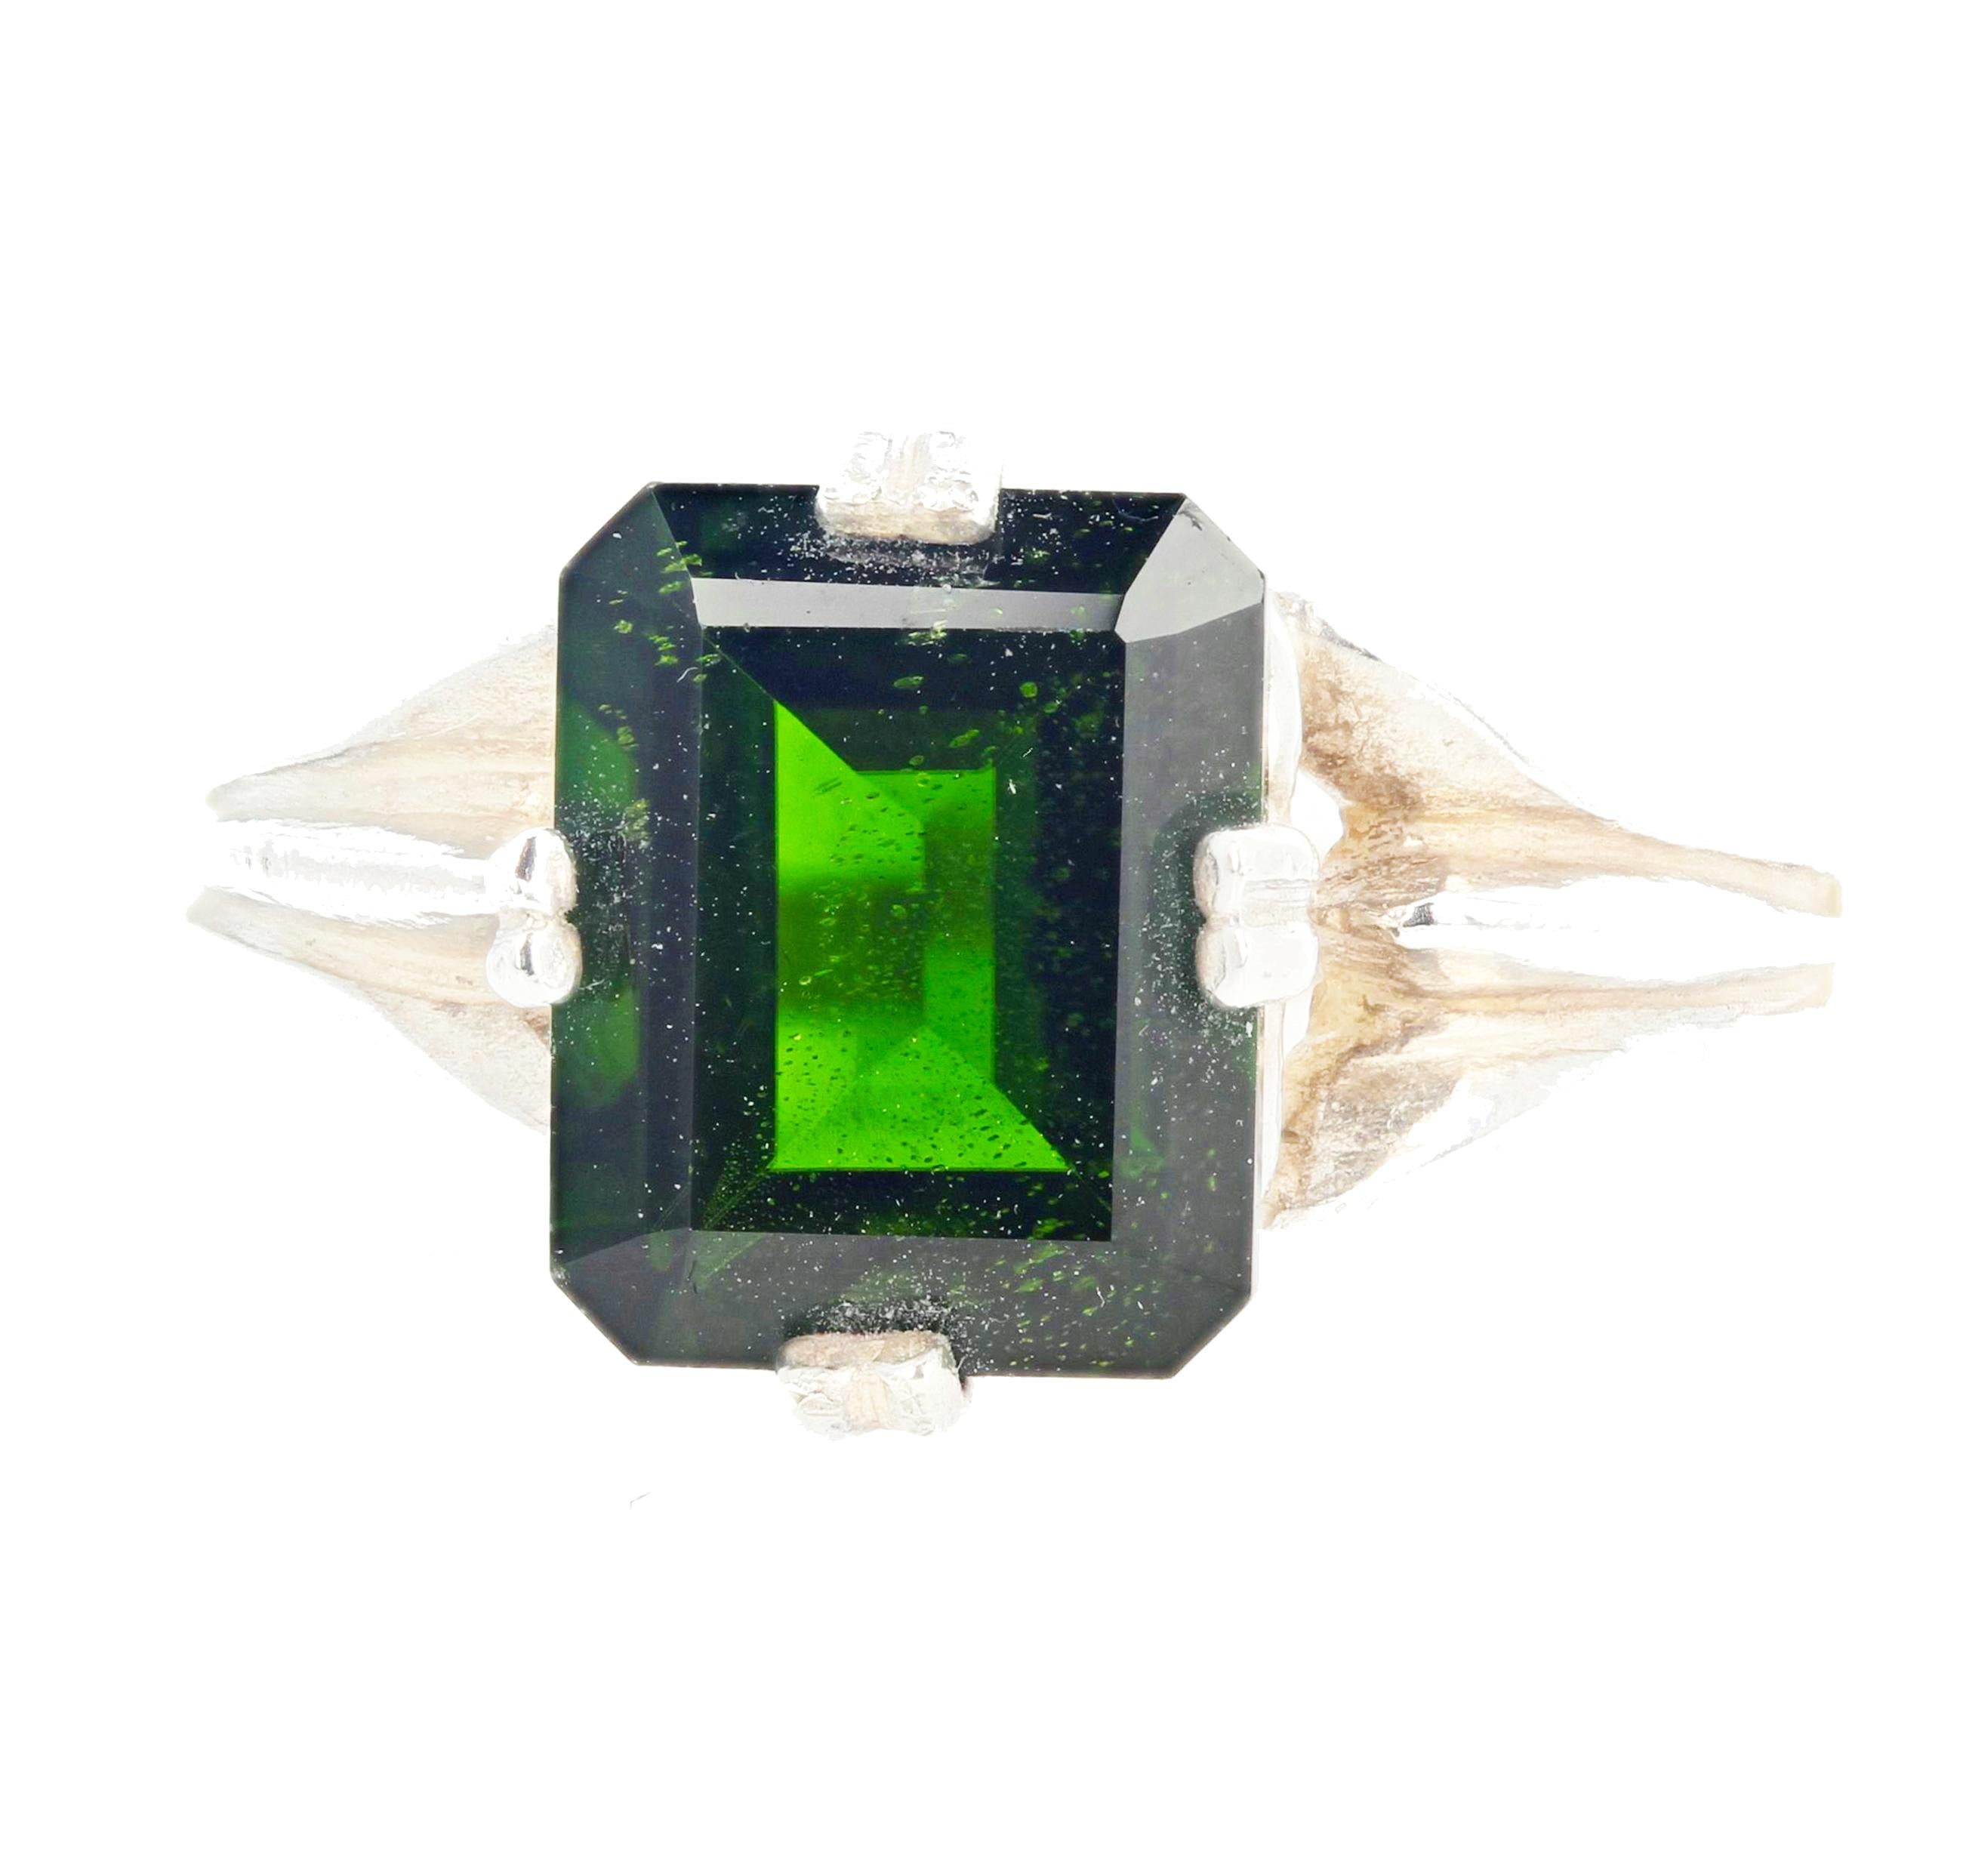 Brilliantly glittering cushion cut 2.8 carat natural Chrome Diopside - 10 mm x 8.1 mm - set in a sterling silver ring size 7 sizable for free.  This glows a bright intense green and is wonderful for day-to-evening occasions.  There are no eye